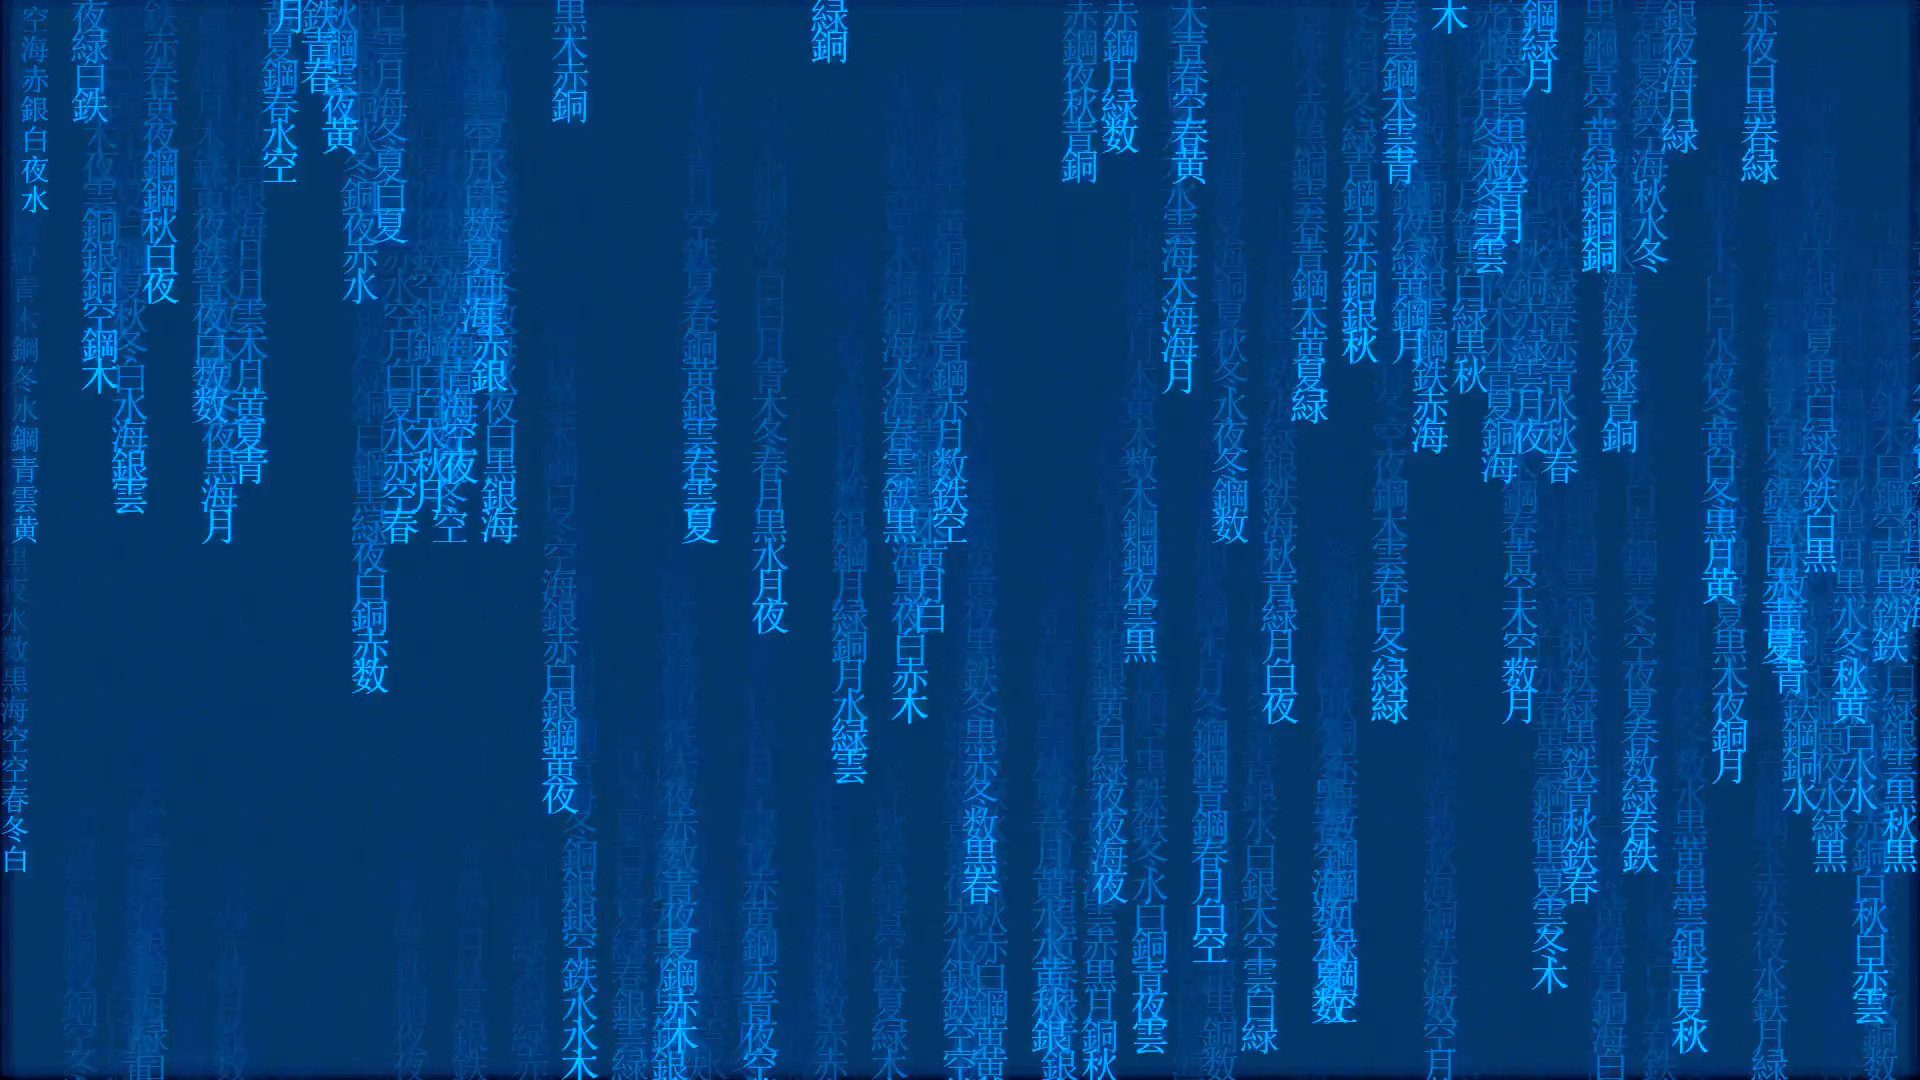 1920x1080 Subscription Library blue Japan matrix background, computer generated code  with Japanese and Chinese characters.